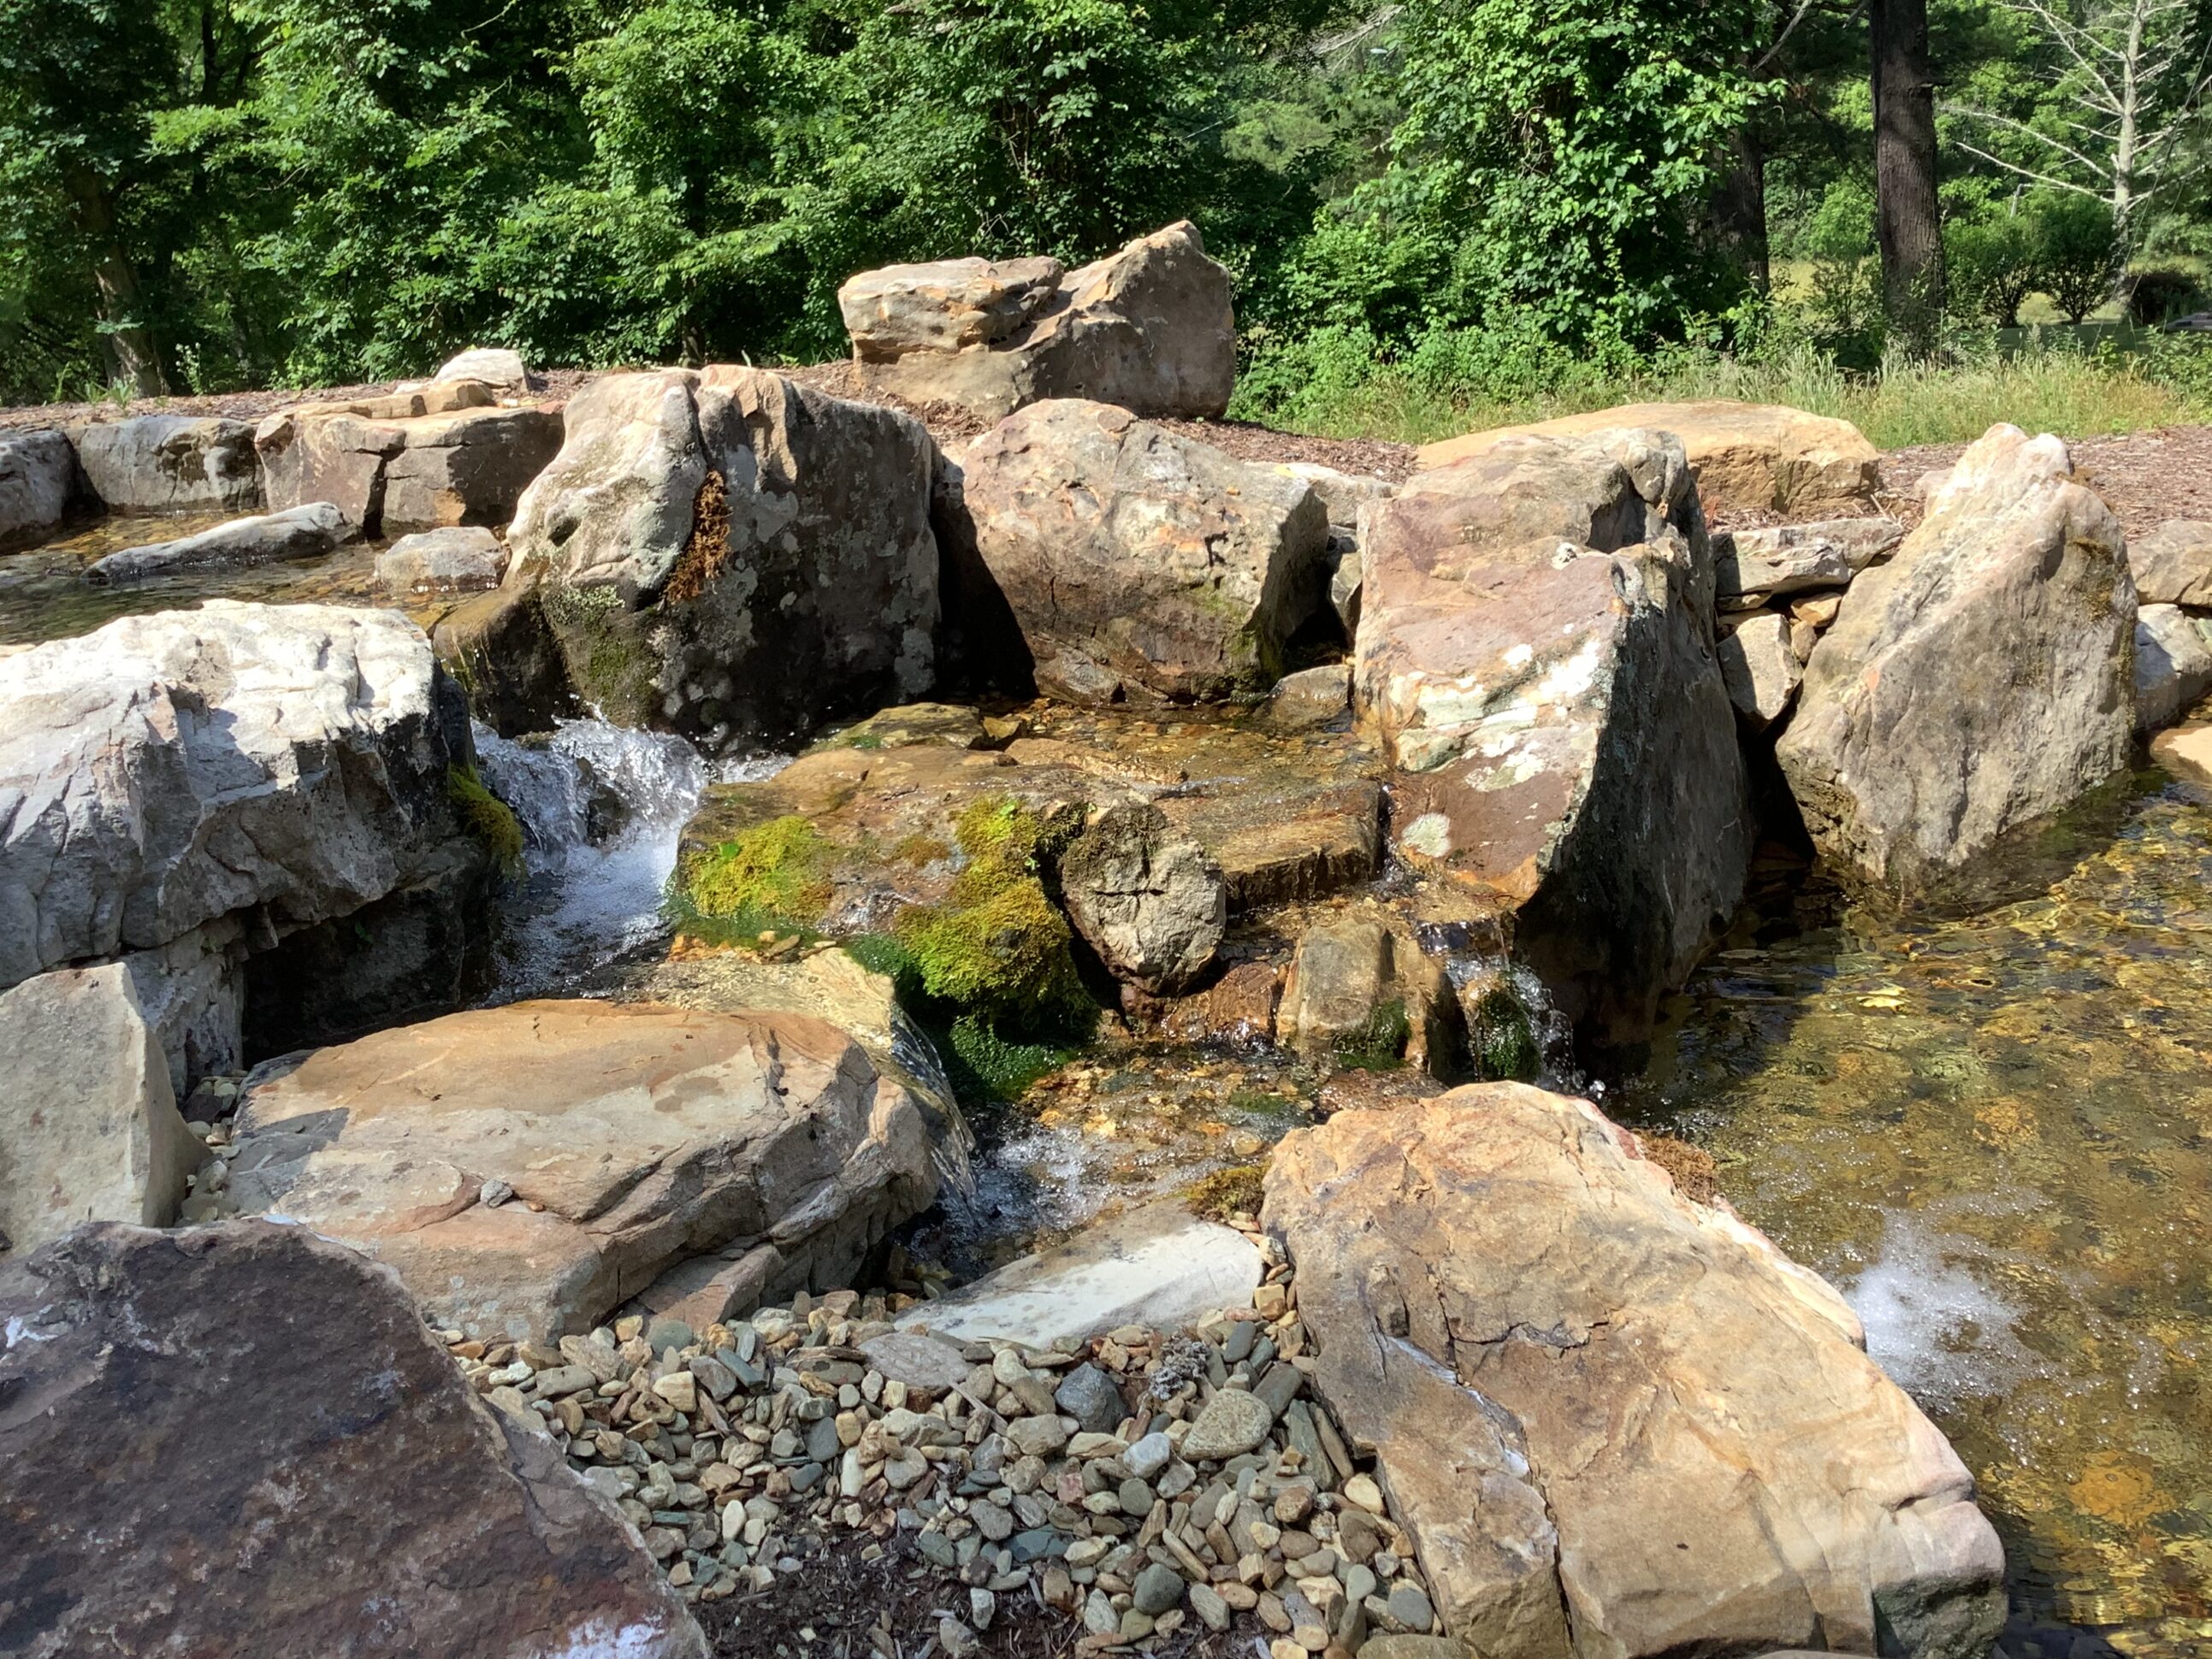 A stream of water flowing over rocks in the forest.